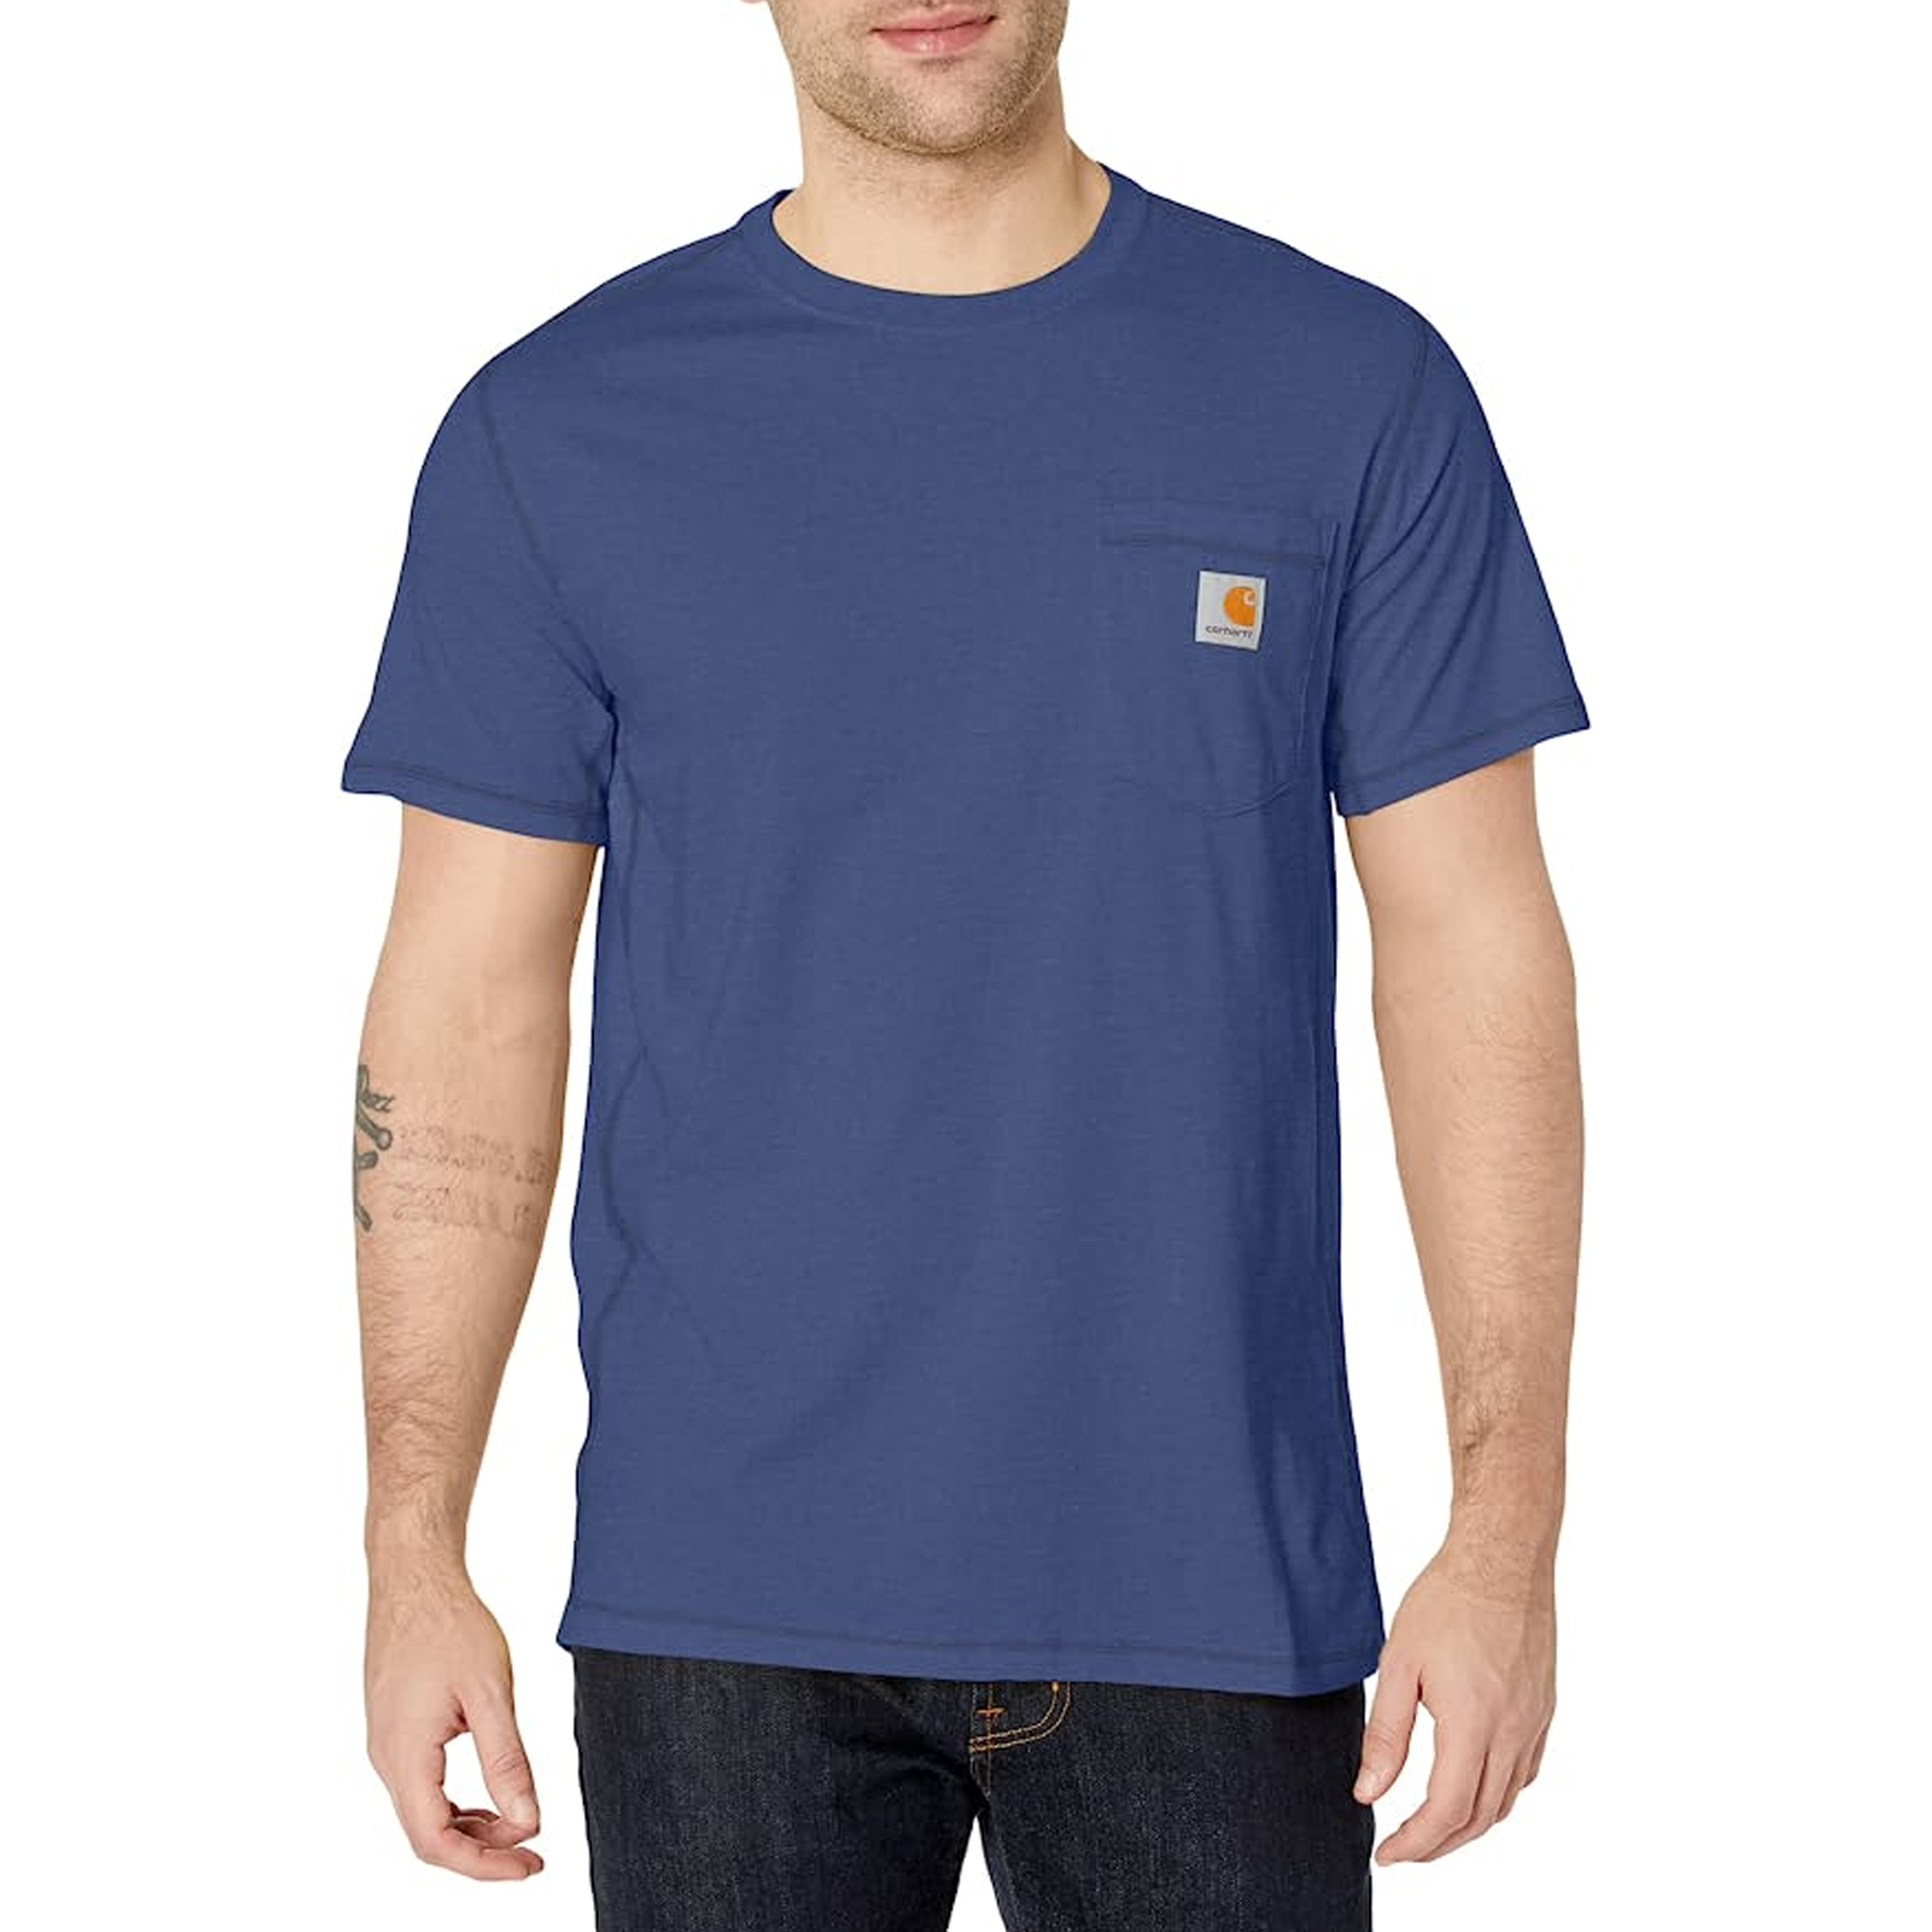 Carhartt Workwear Pocket Tee - Scout Blue Heather - Well Bred Store